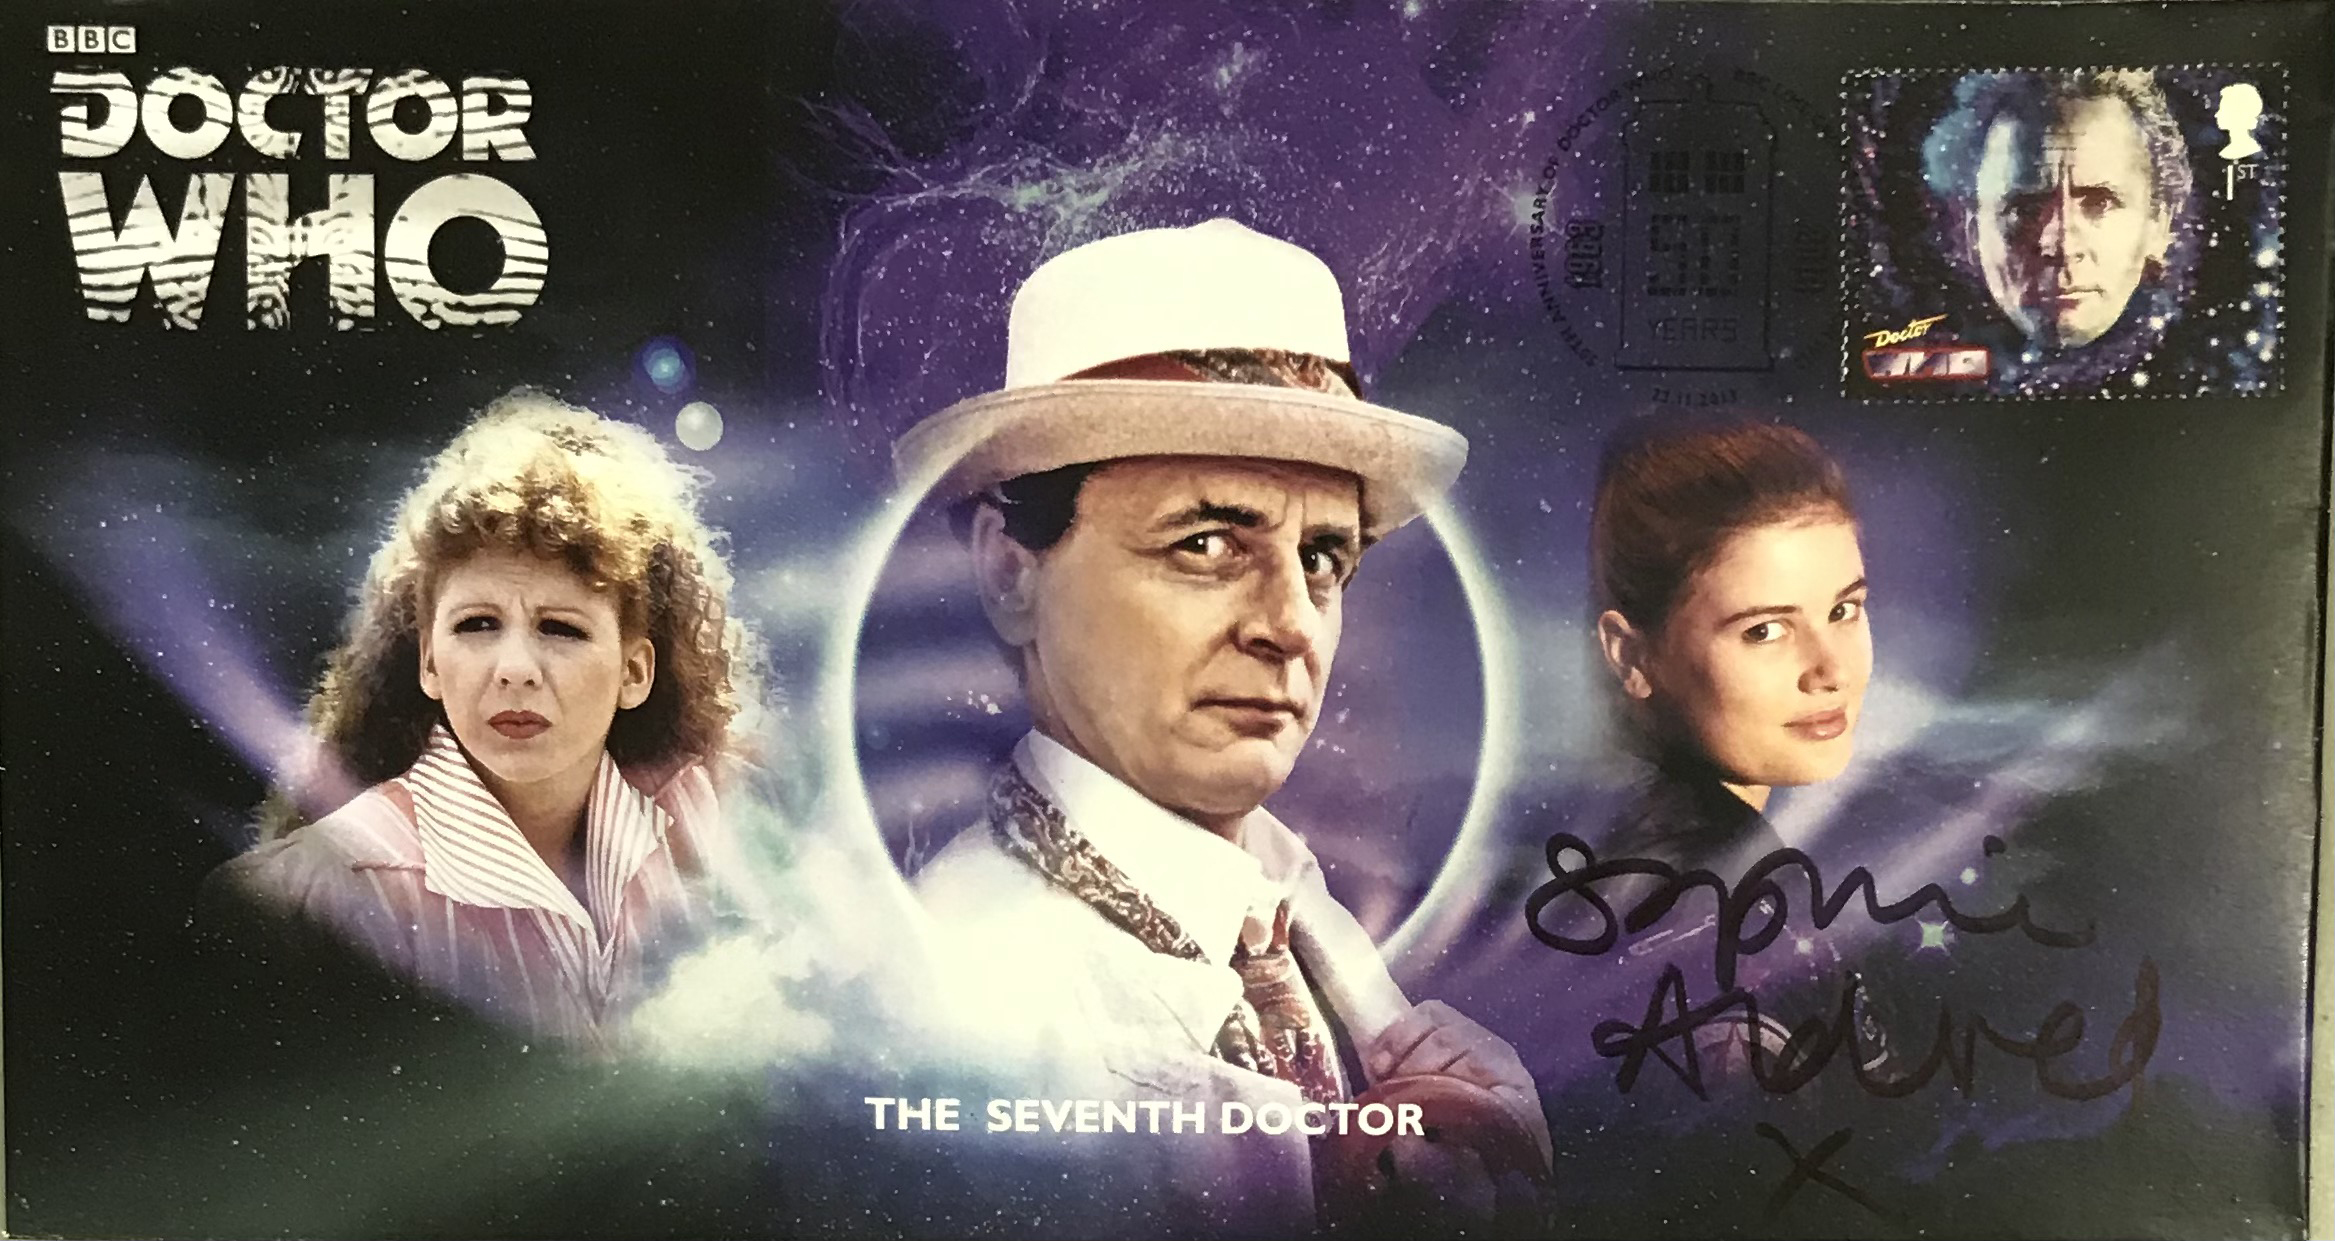 The Seventh Doctor Who COMPANIONS SERIES Stamp First Day Cover Signed SOPHIE ALDRED